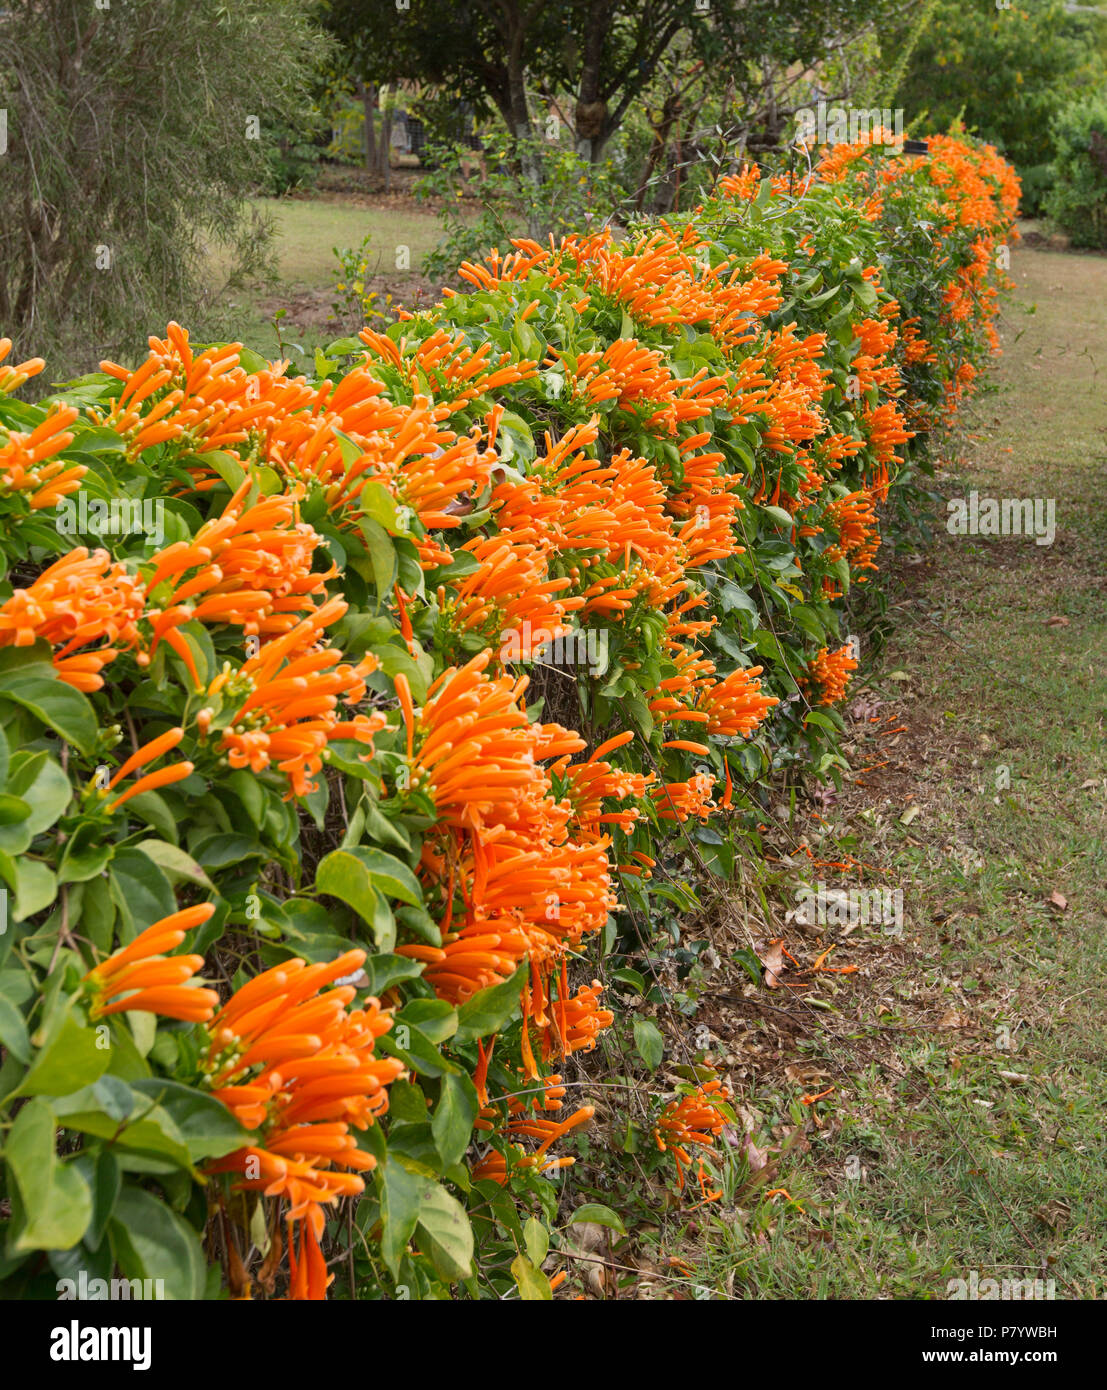 Pyrostegia venusta, Golden Glory Vine, with mass of vivid golden orange flowers and green foliage covering low fence of garden in Qld Australia Stock Photo